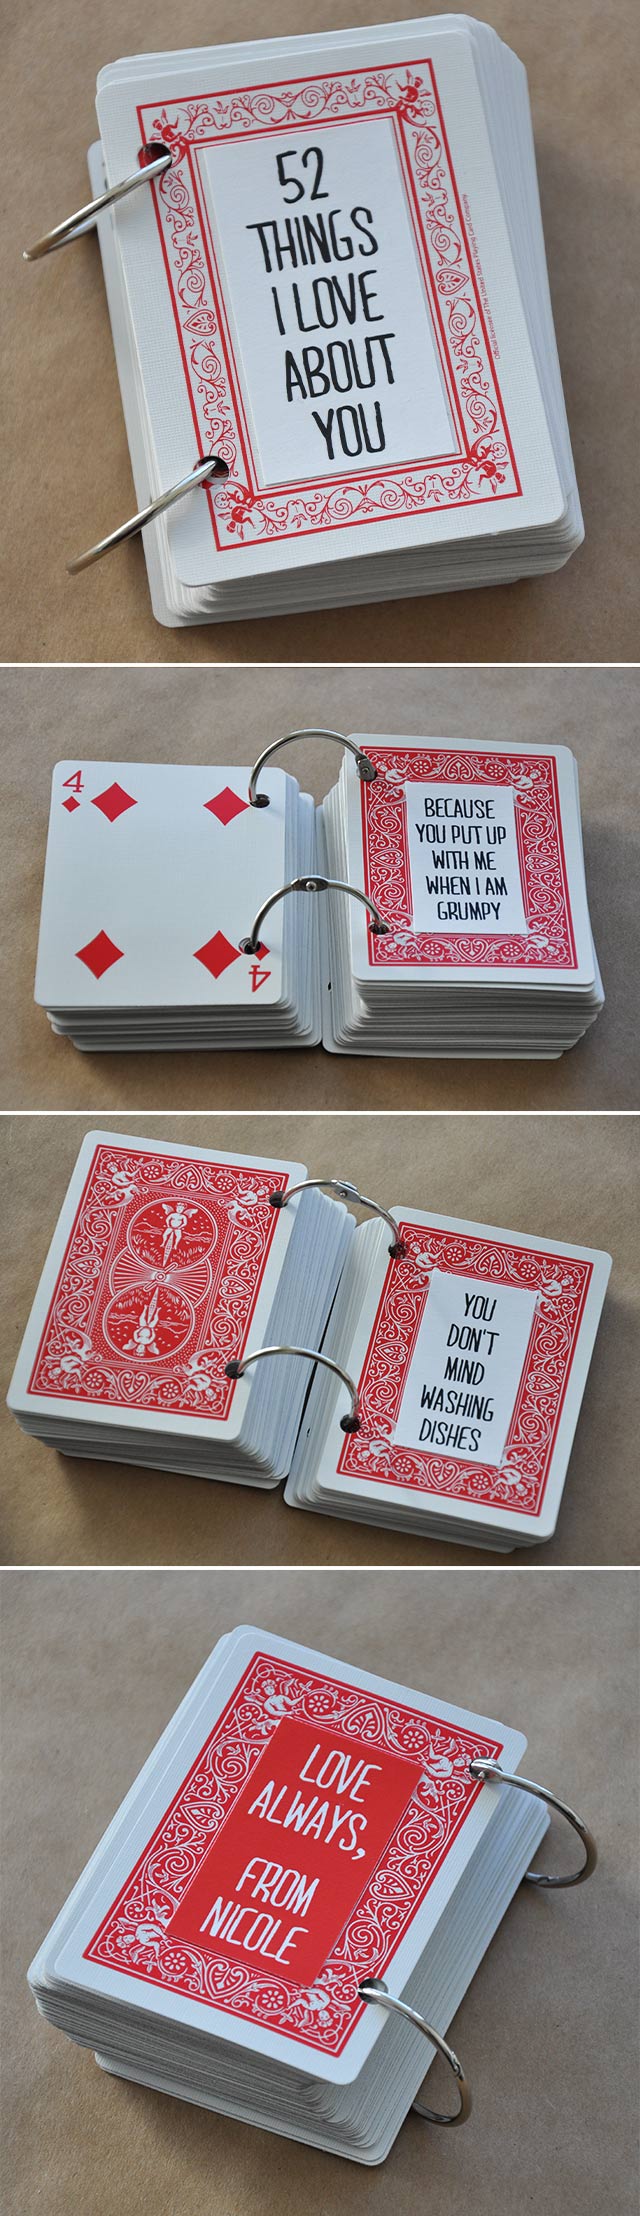 23 Things I Love About You • visual heart creative studio For 52 Things I Love About You Deck Of Cards Template